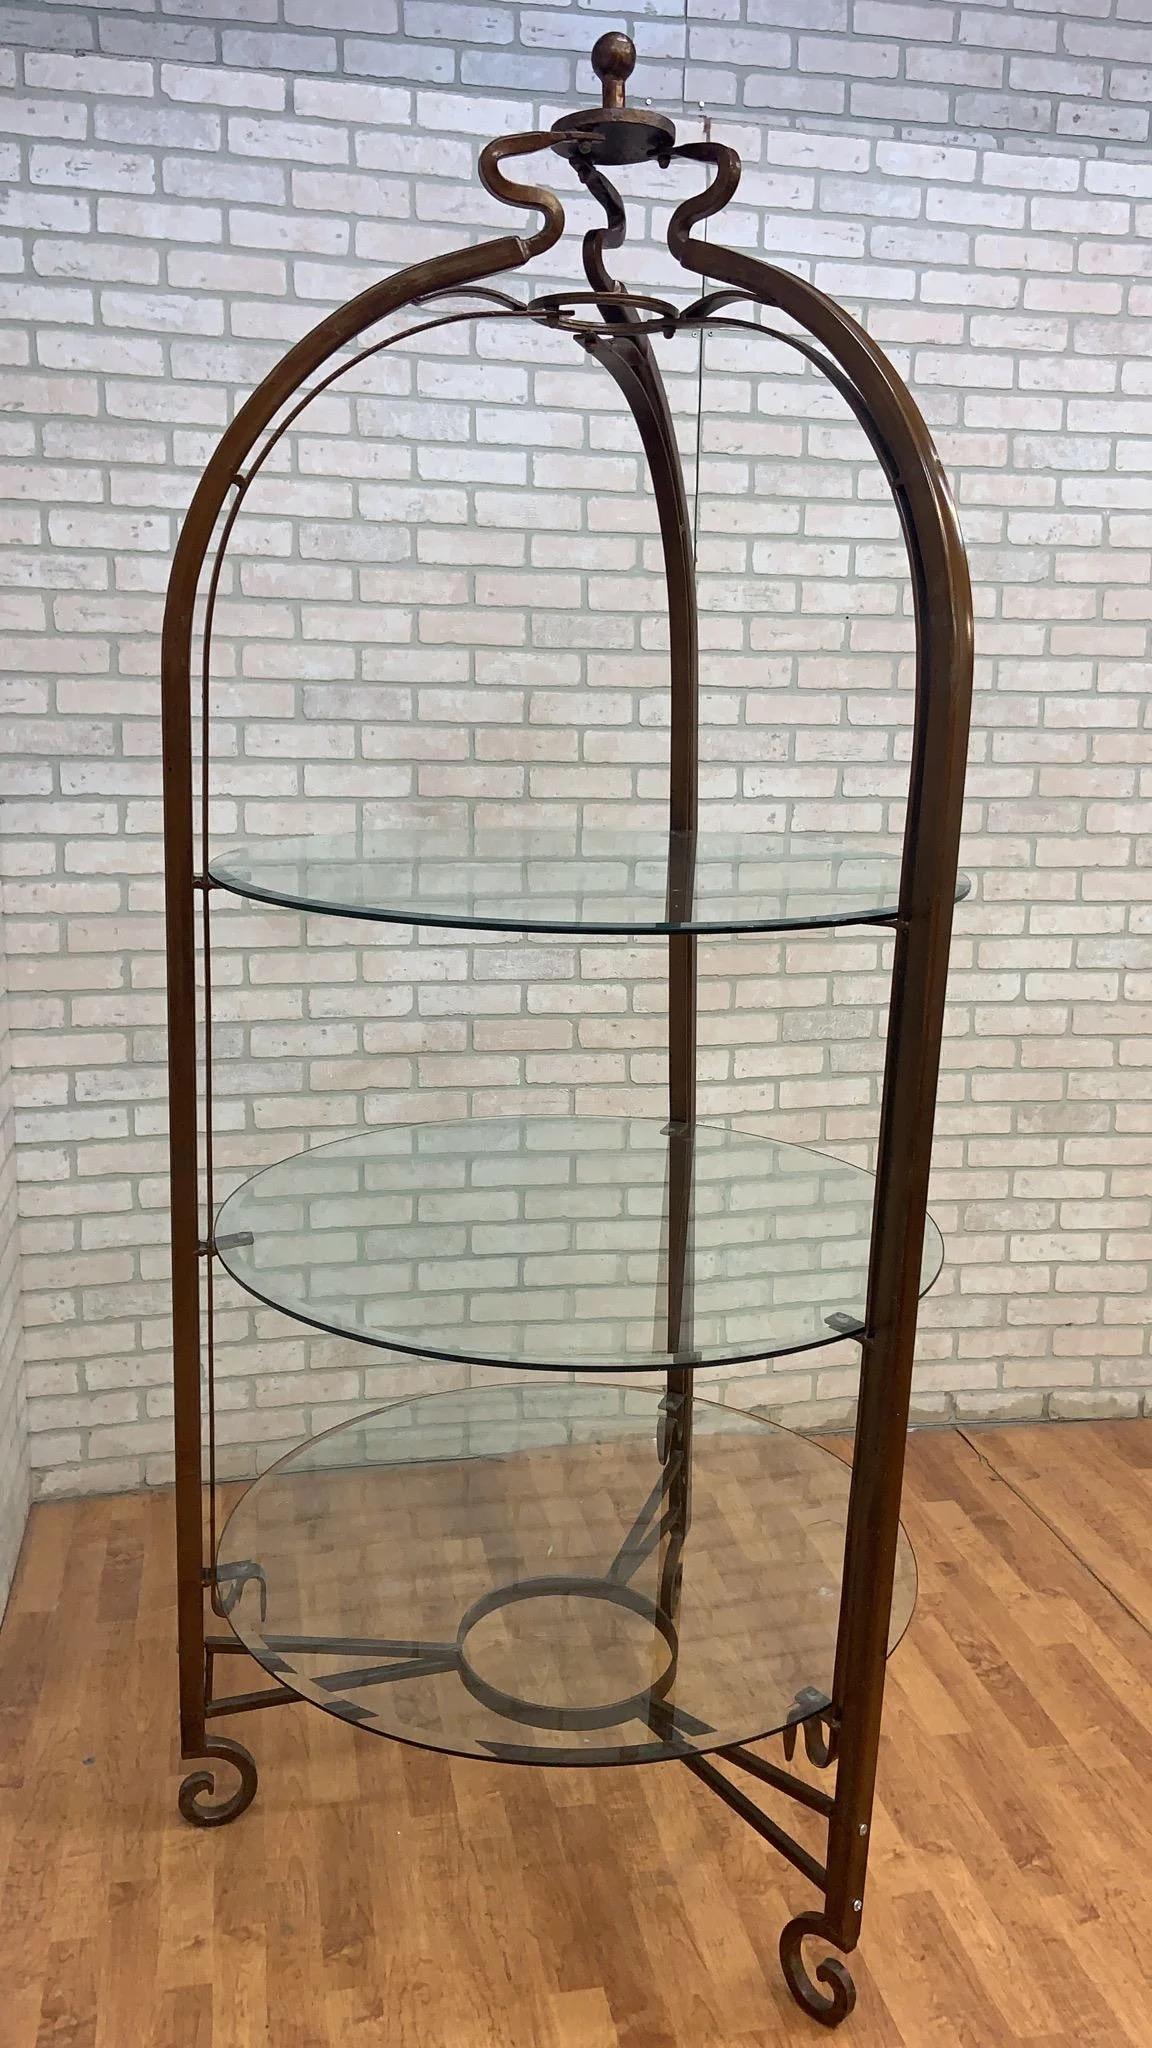 Vintage Victorian Style Iron and Beveled Circular Glass Shelve Boutique/Closet Display Stand

This vintage Victorian style display stand is a striking and ornate piece of furniture. This display stand features a tall, wrought-iron frame that is